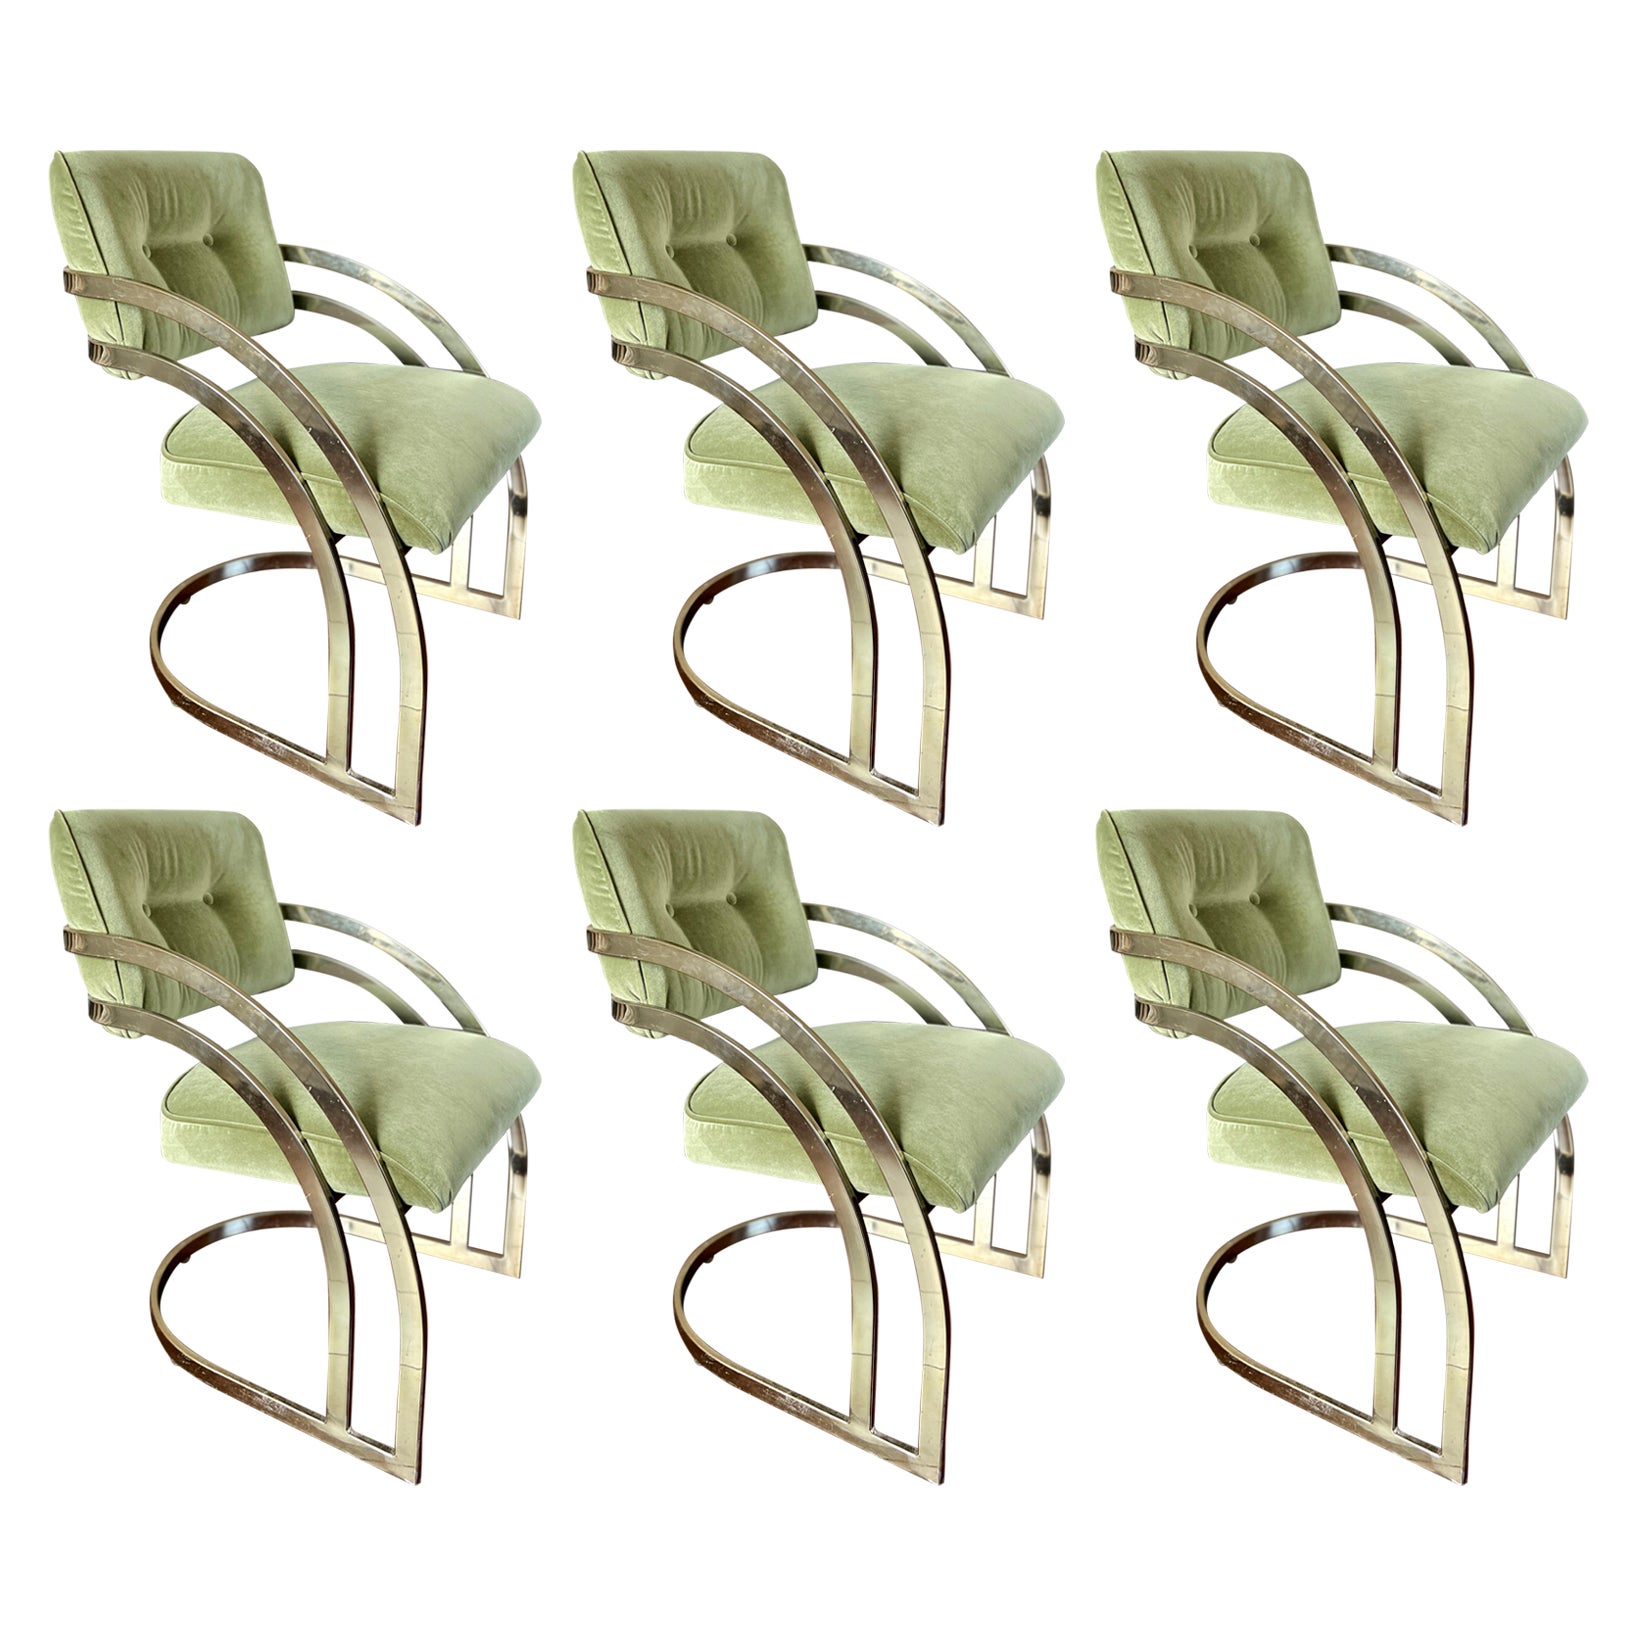 A set of 6 green velvet gold waterfall cantilever brass plated dining chairs